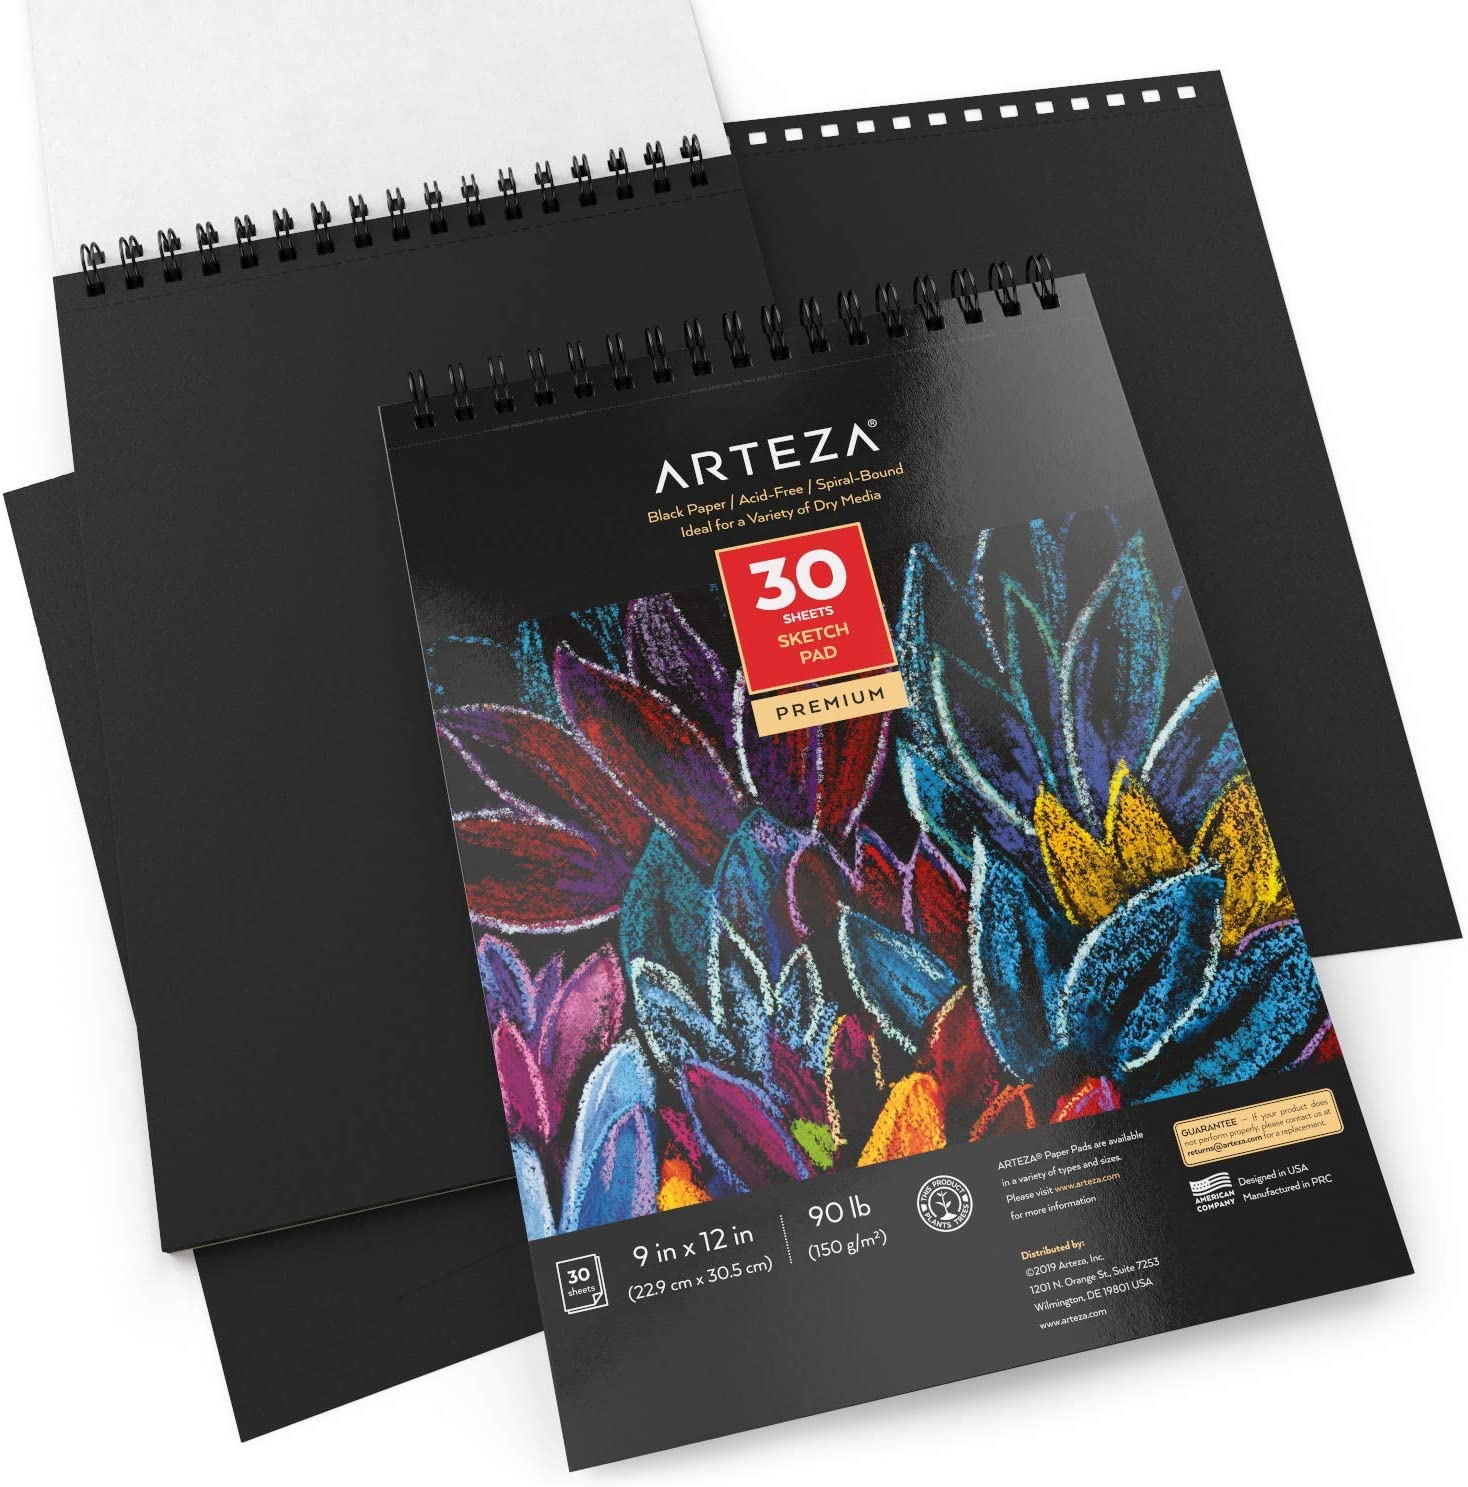 Black Paper 9x12 inches Sketch Pad - 70 Pages  Black paper drawing, Black  paper, Sketch book